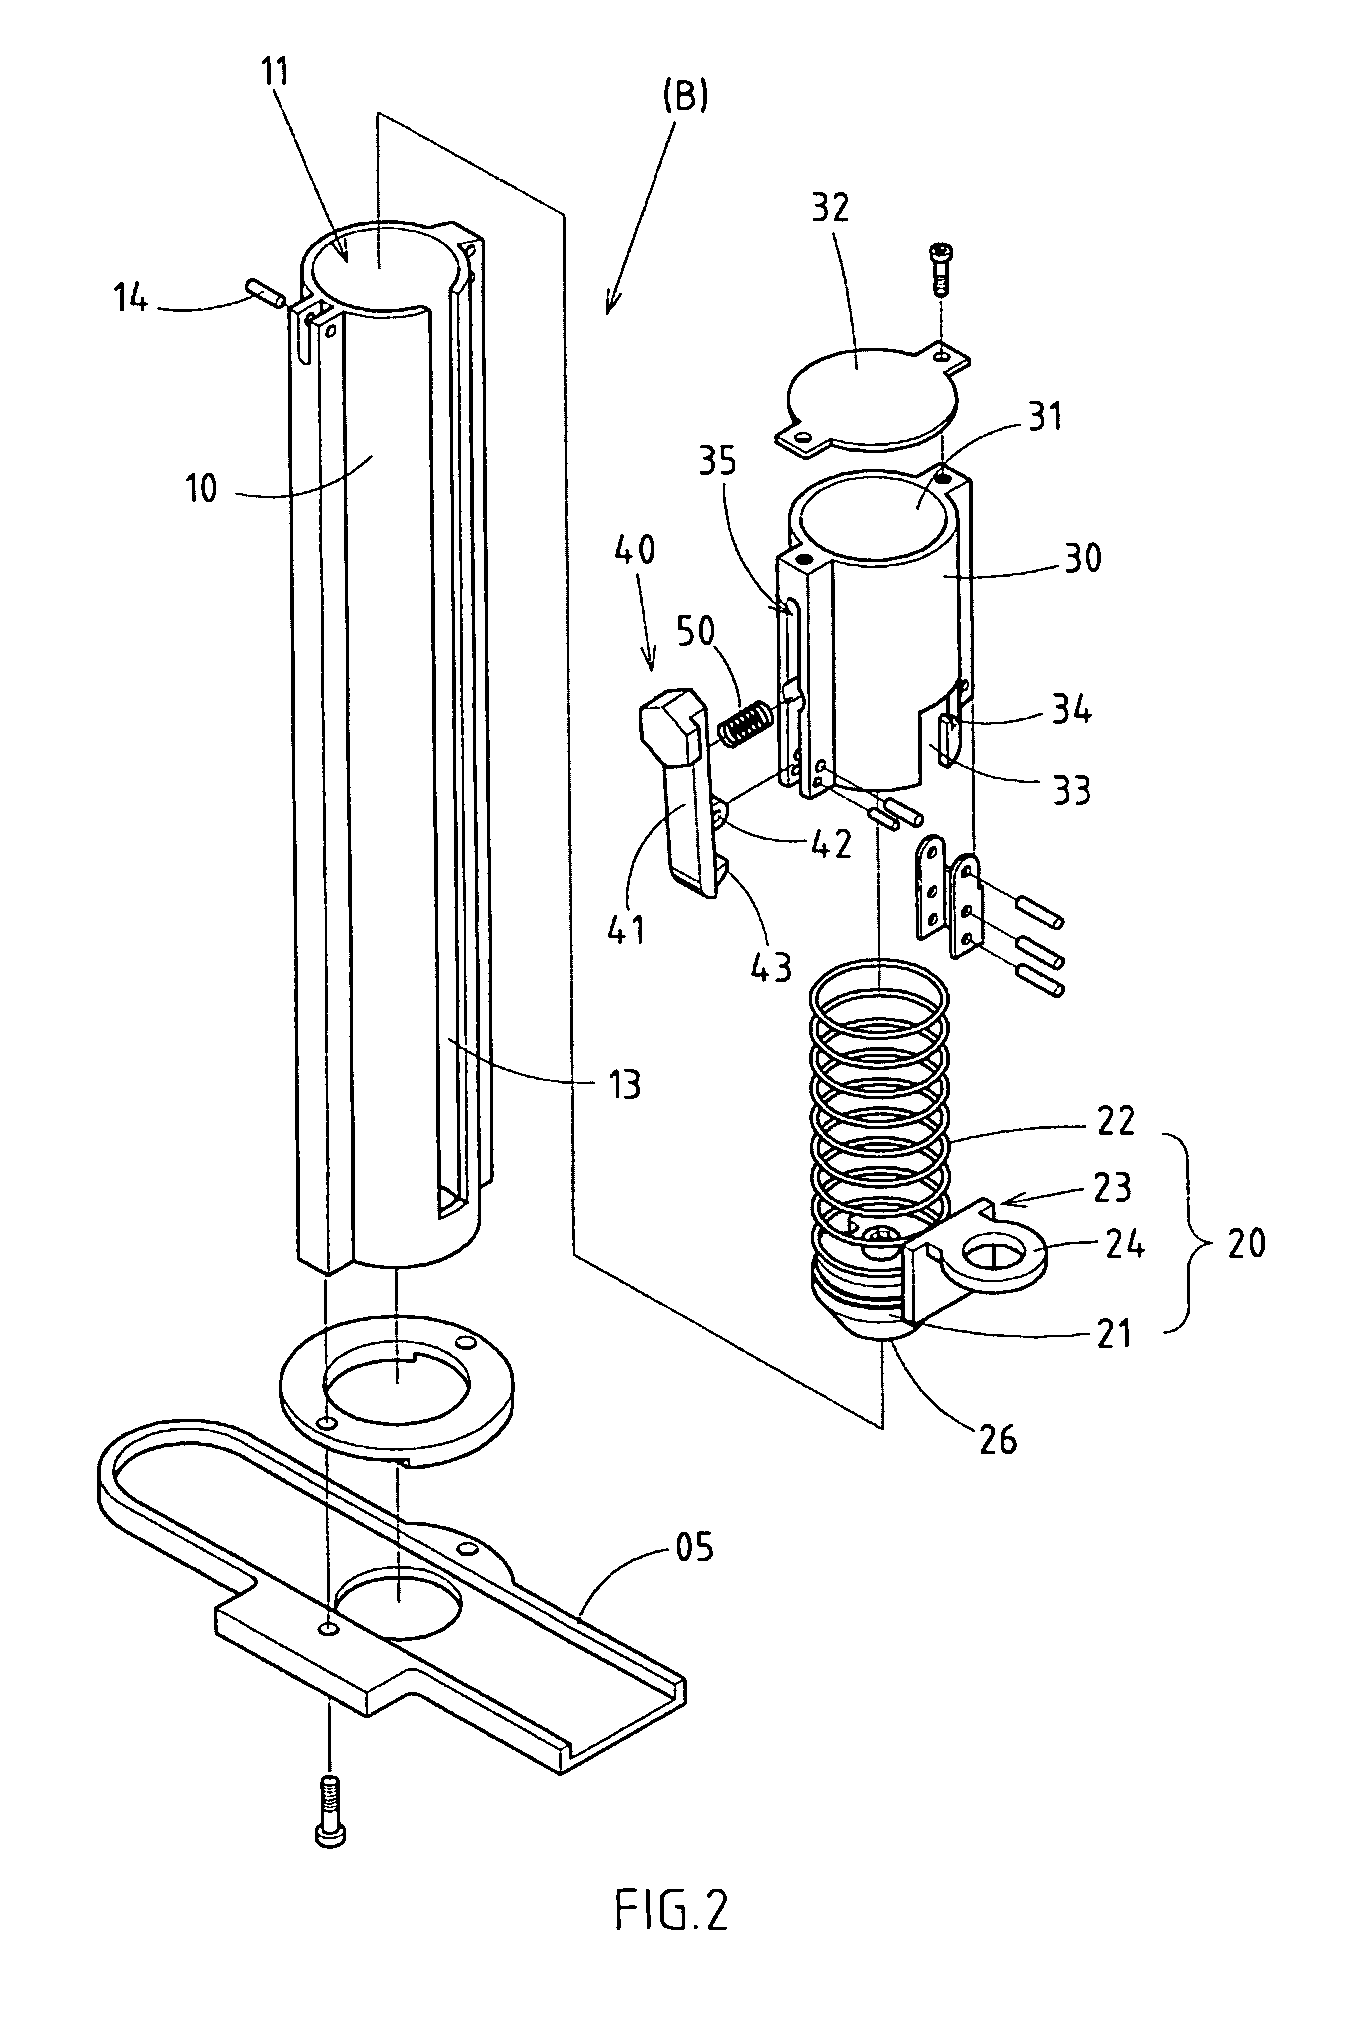 Nailer with improved spacer actuator